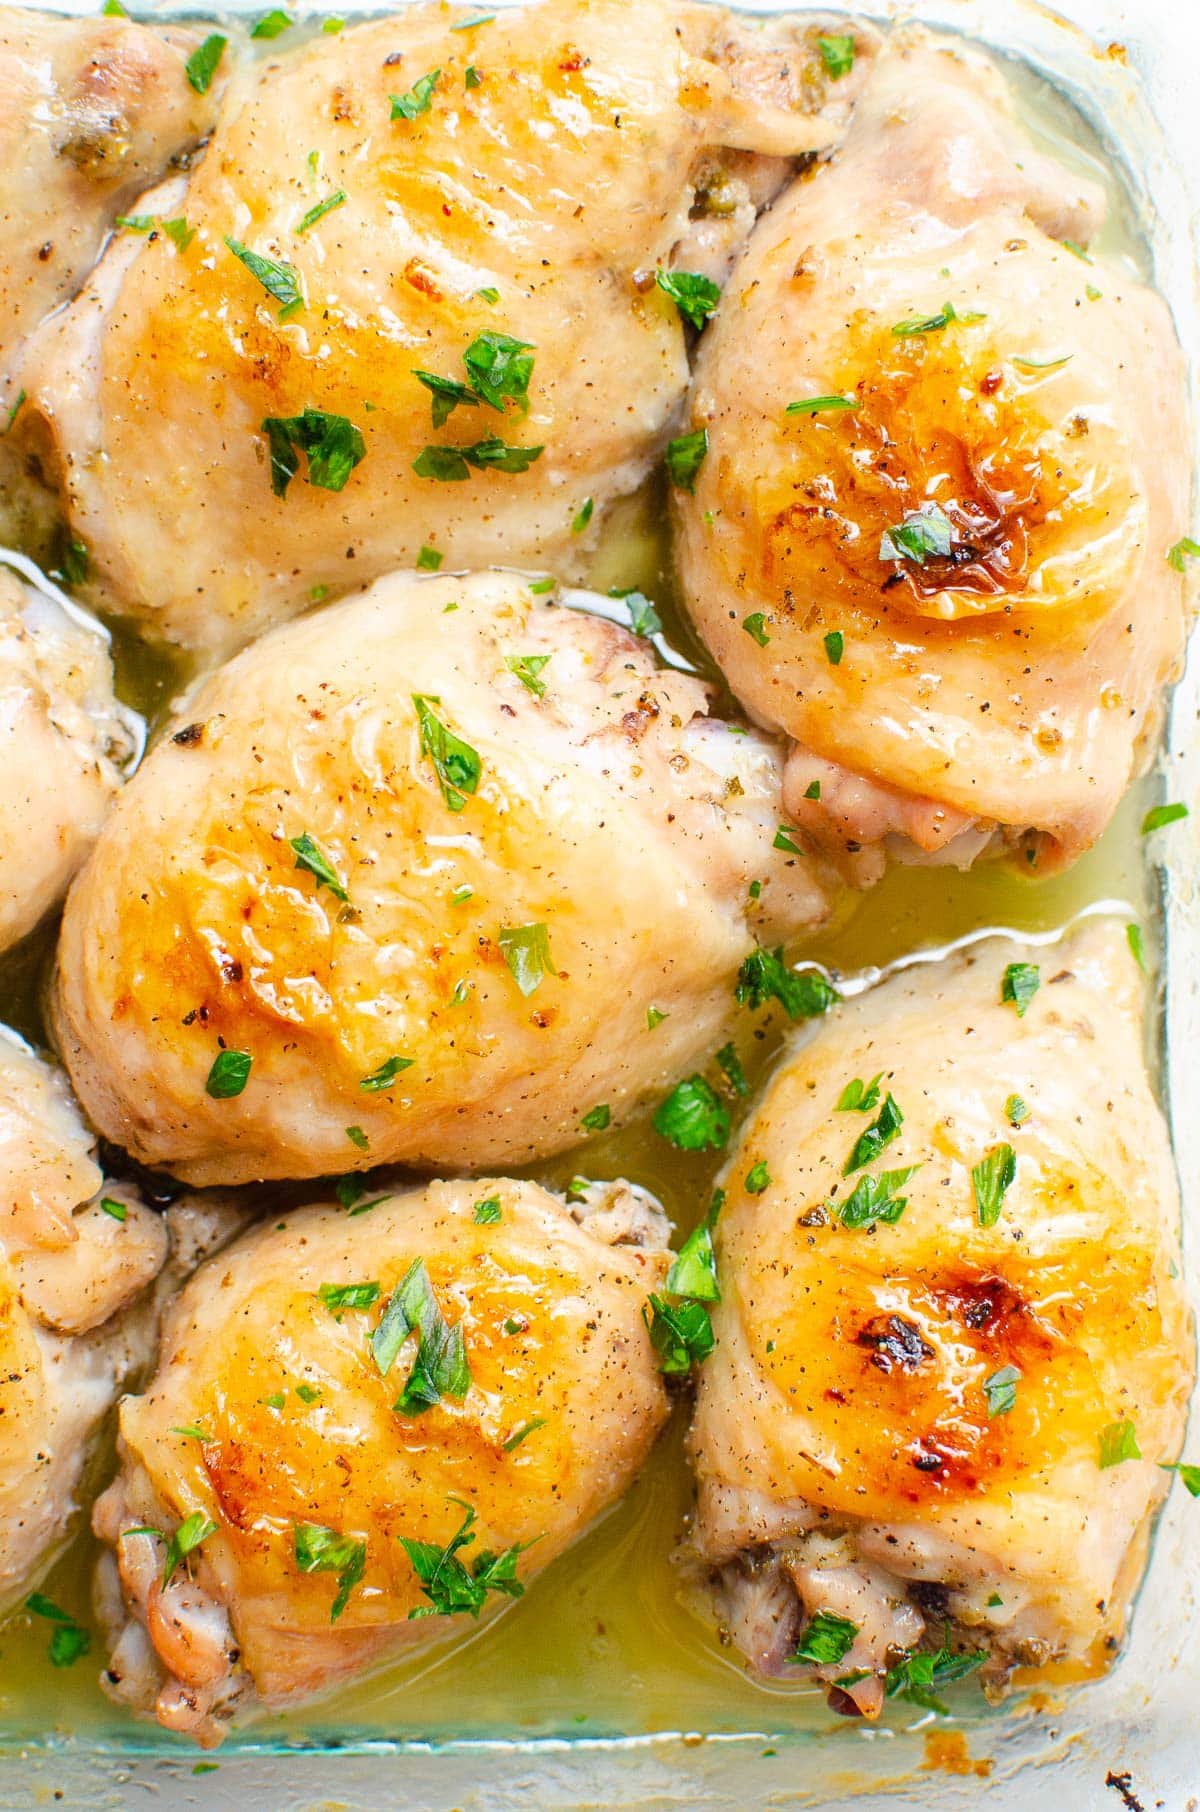 Oven baked chicken thighs with crispy skin and garnished with parsley in a baking dish.